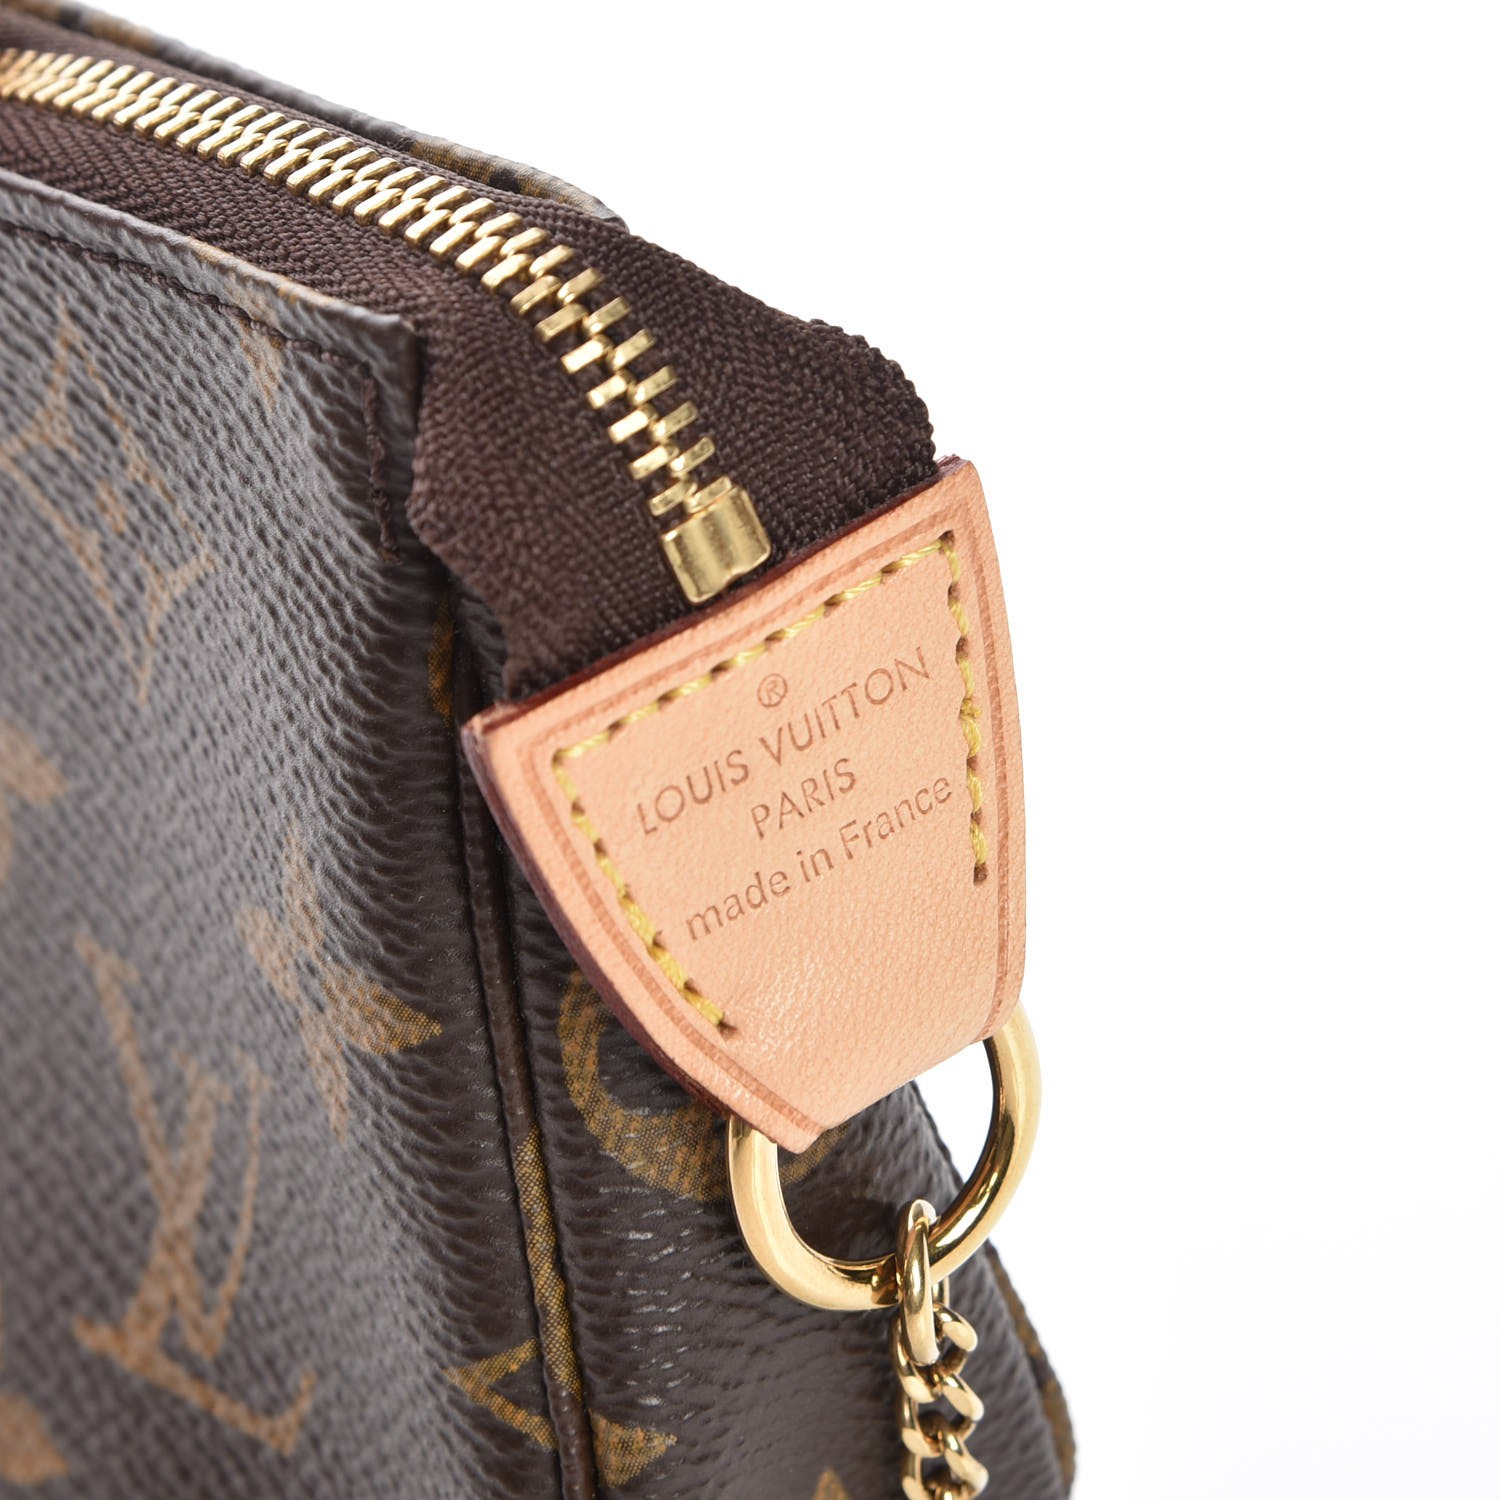 WHAT FITS INSIDE THE LOUIS VUITTON POCHETTE ACCESSORIES? IS IT